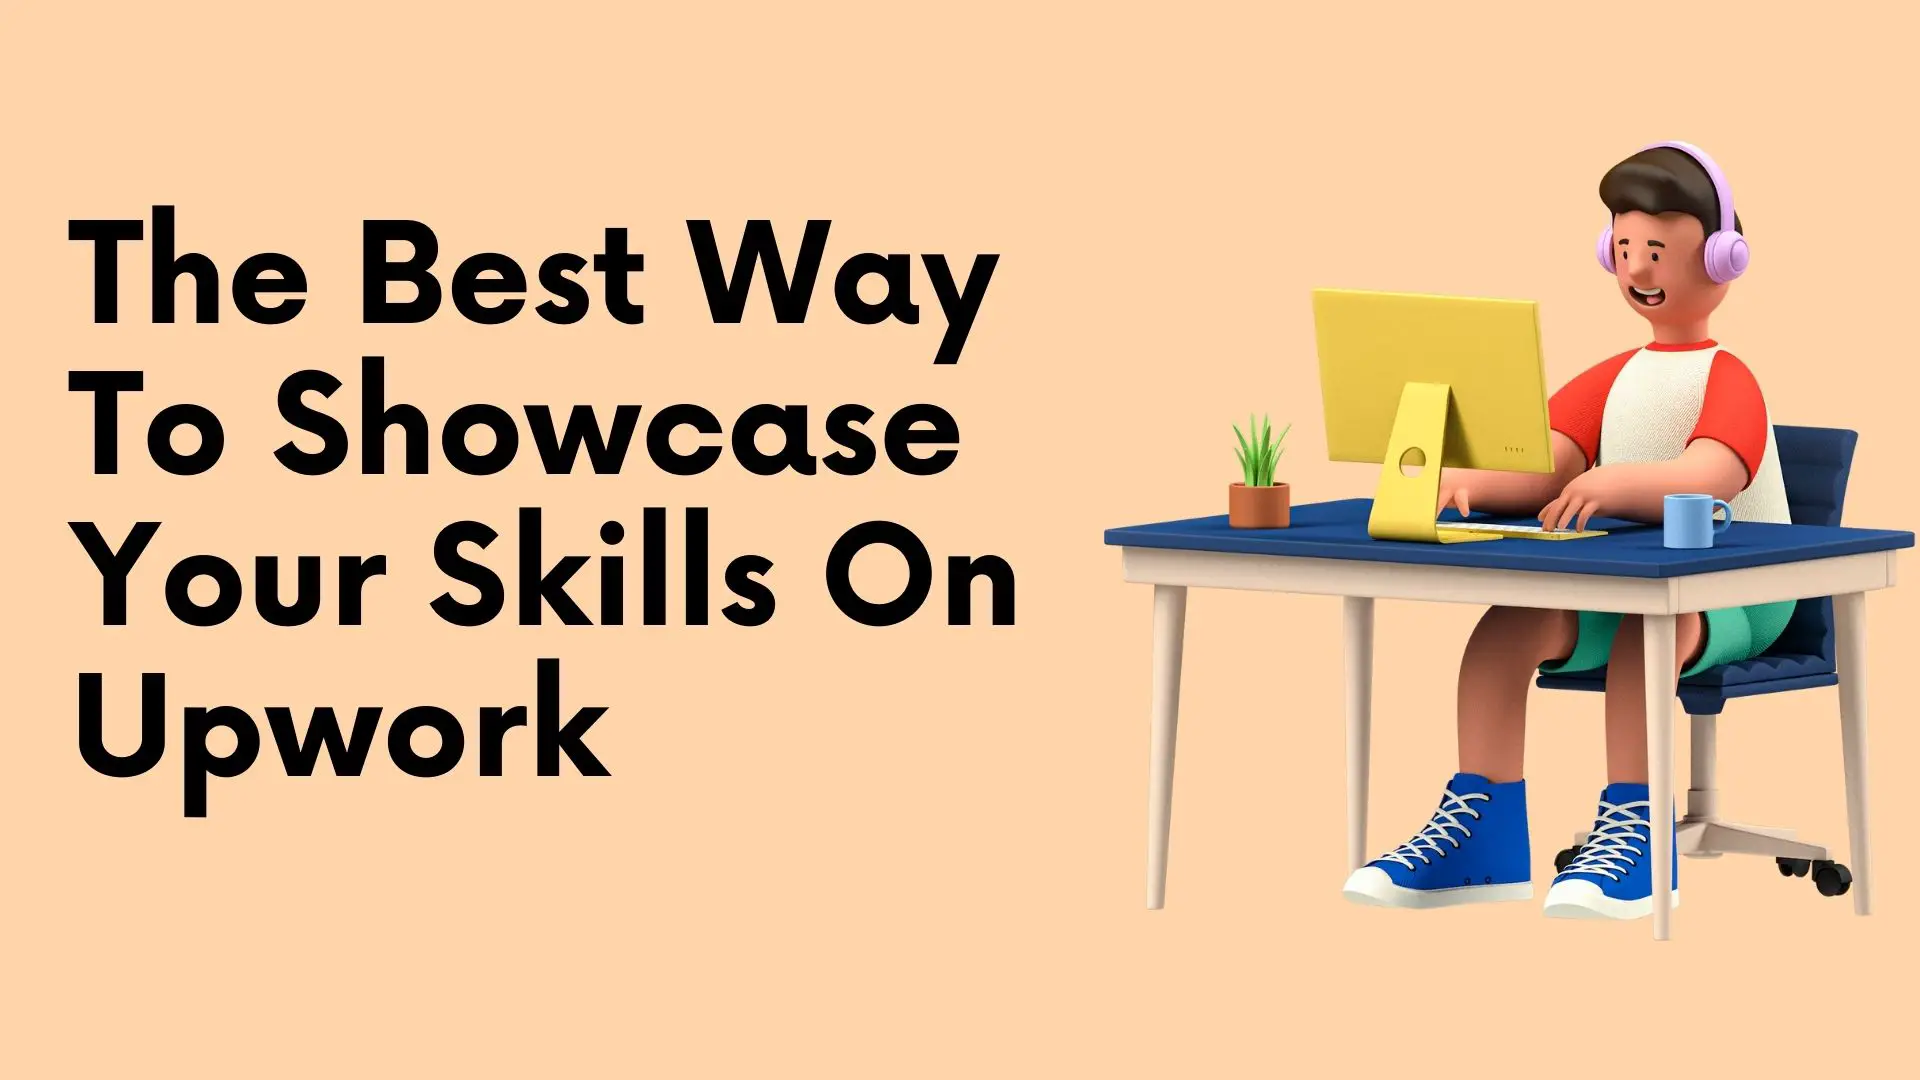 The Best Way To Showcase Your Skills On Upwork